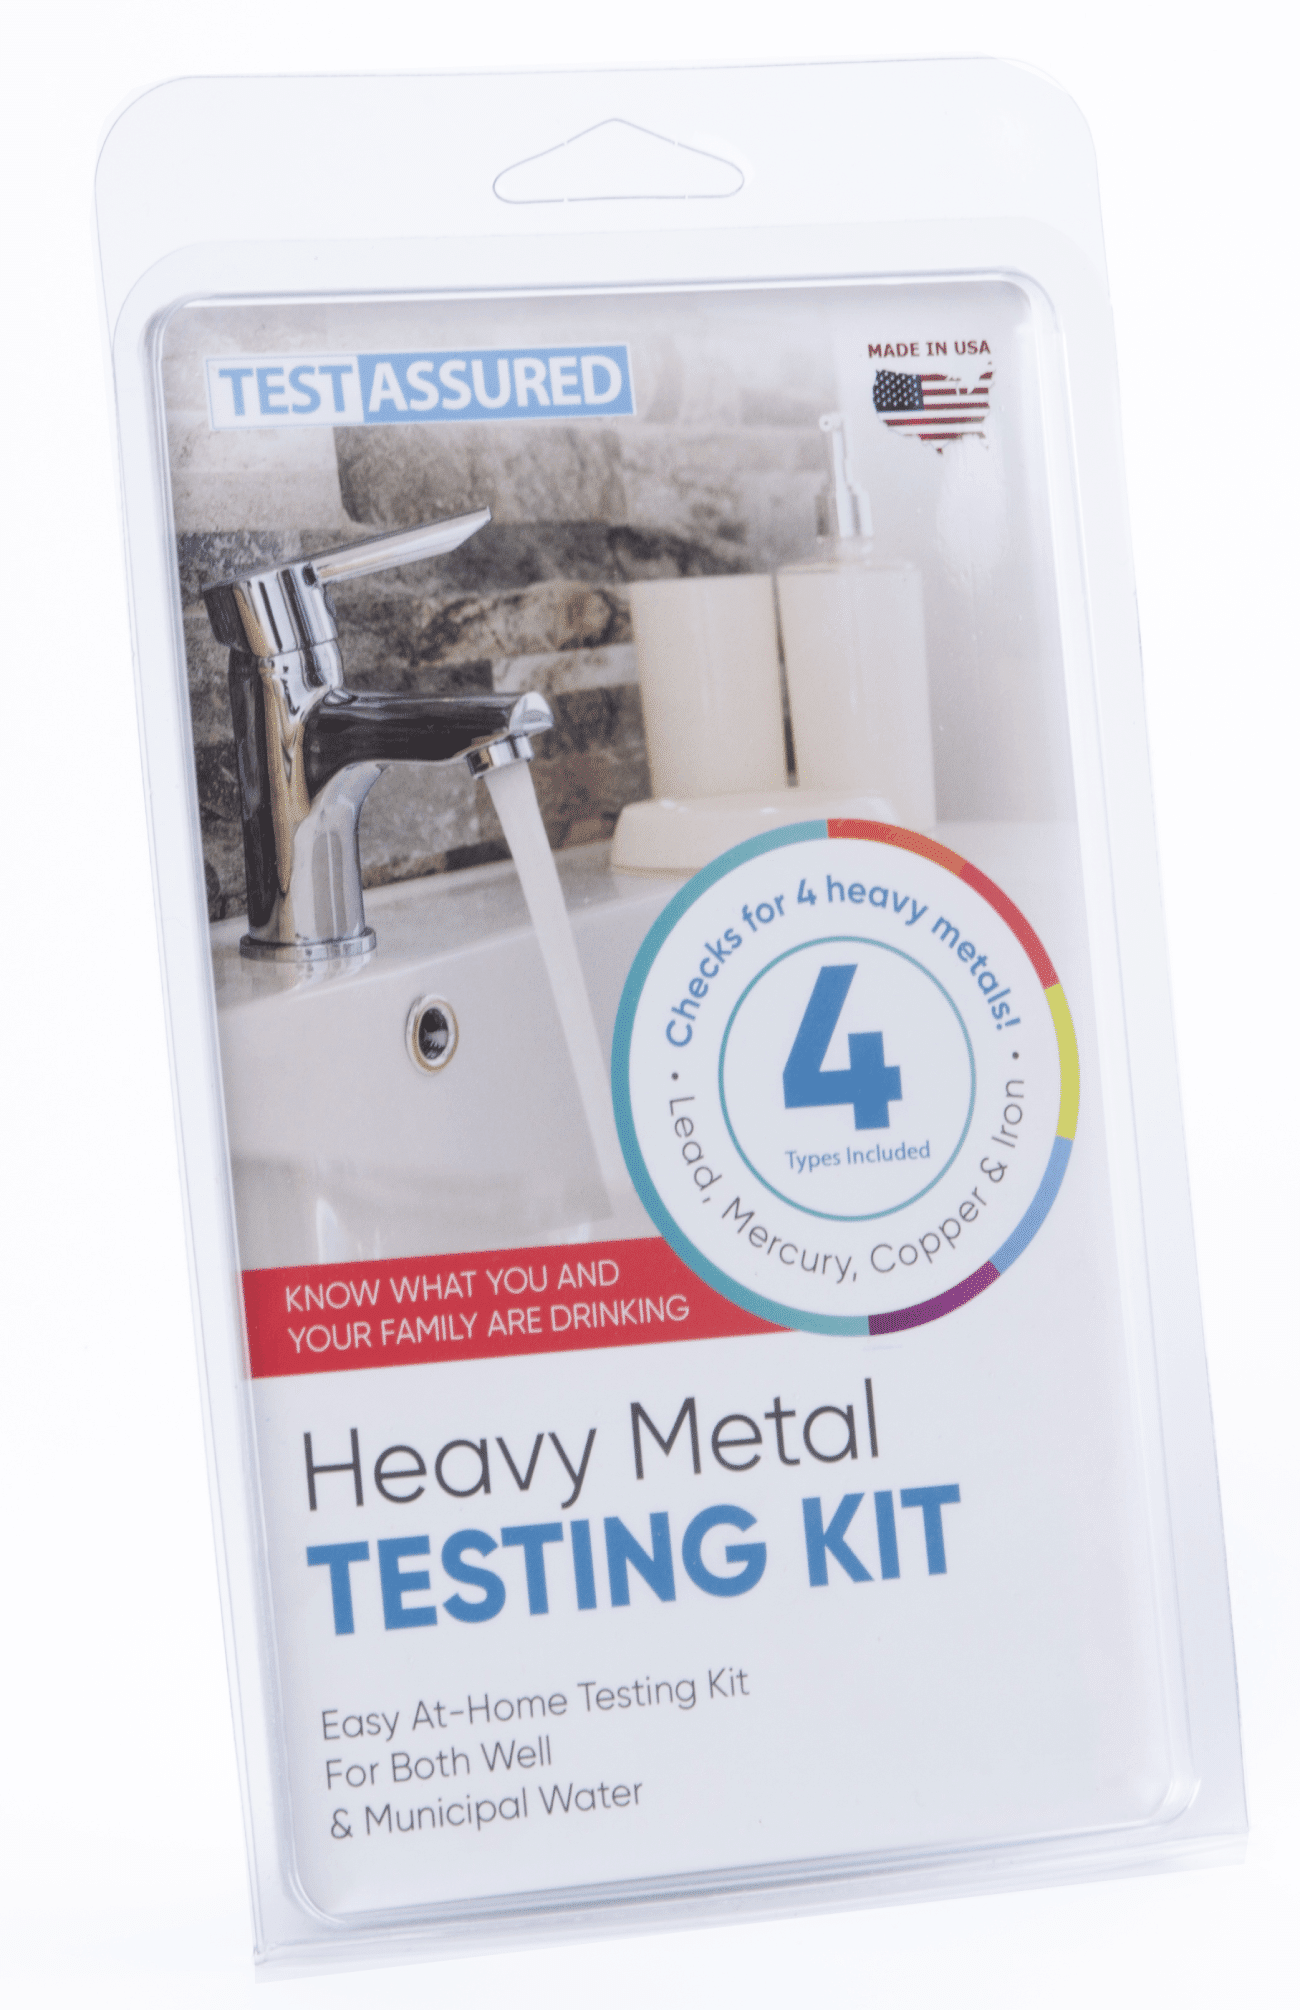 Heavy Metals Home Test Kit For Lead, Mercury, Iron & Copper